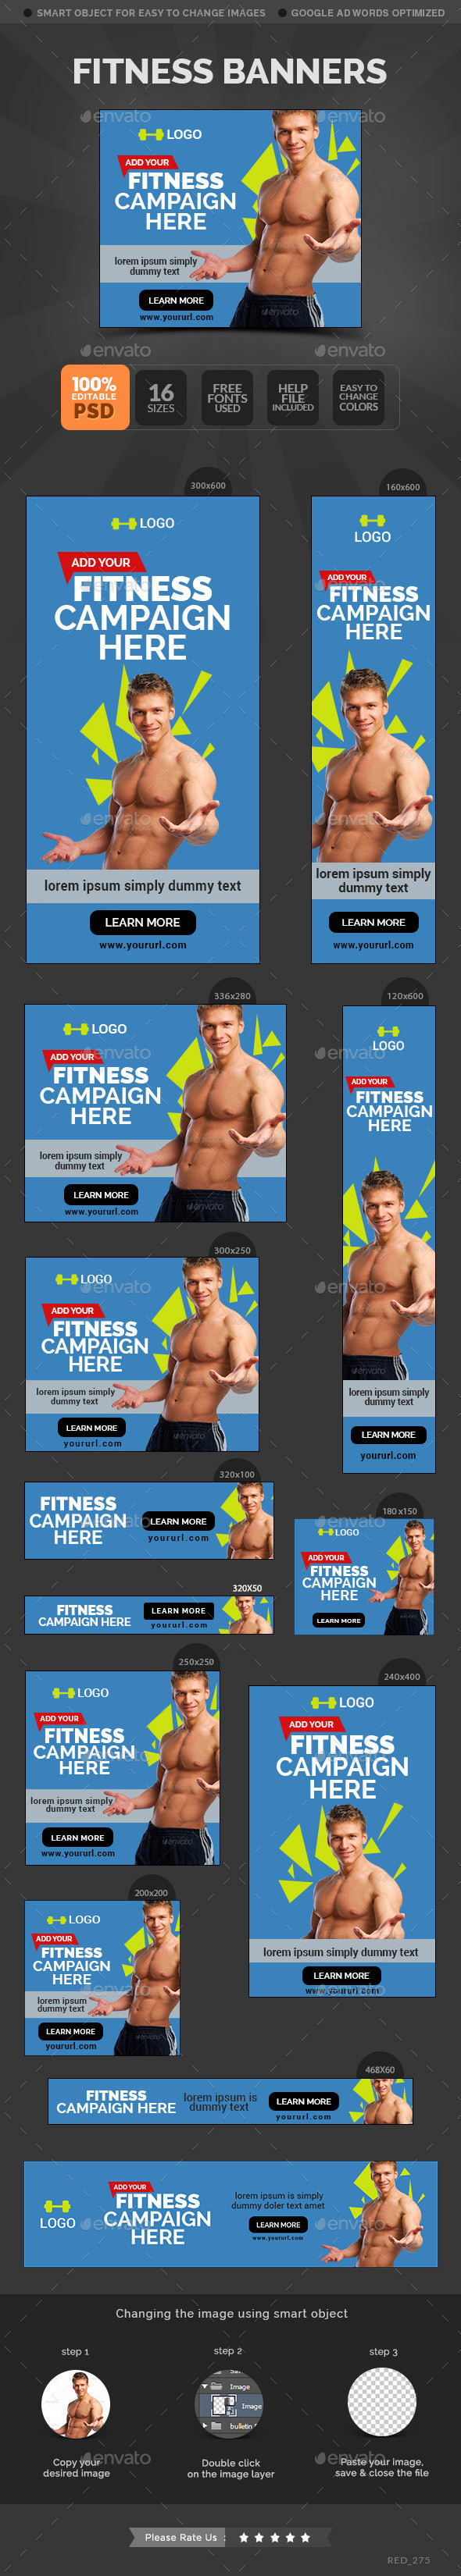 Red 275 fitness 20banners preview